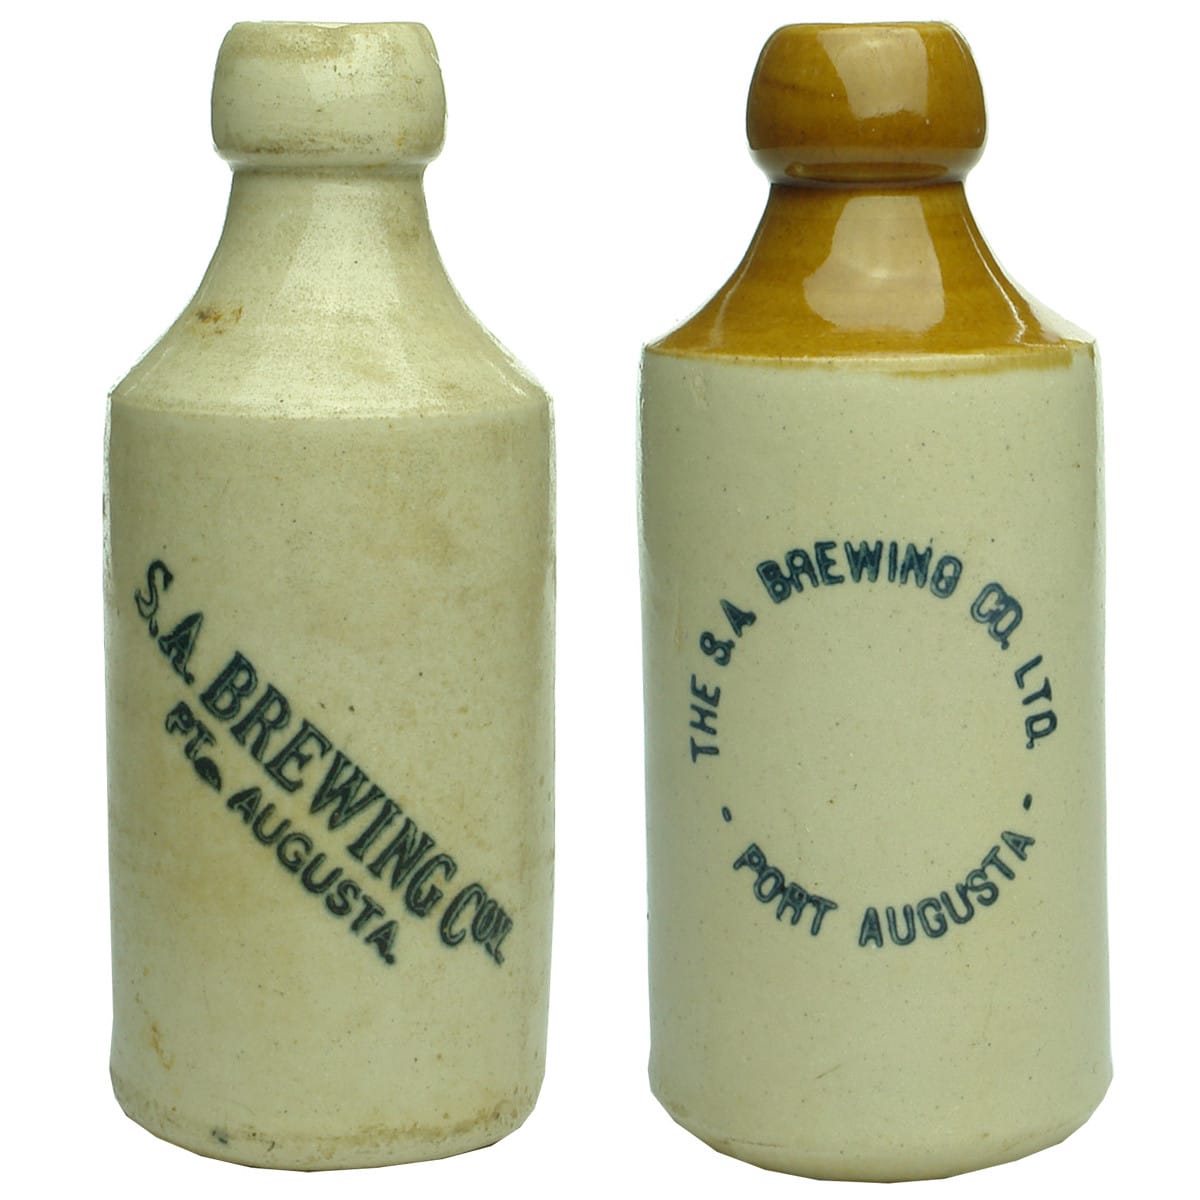 Two different S. A. Brewing Co., Port Augusta Ginger Beers. (South Australia)